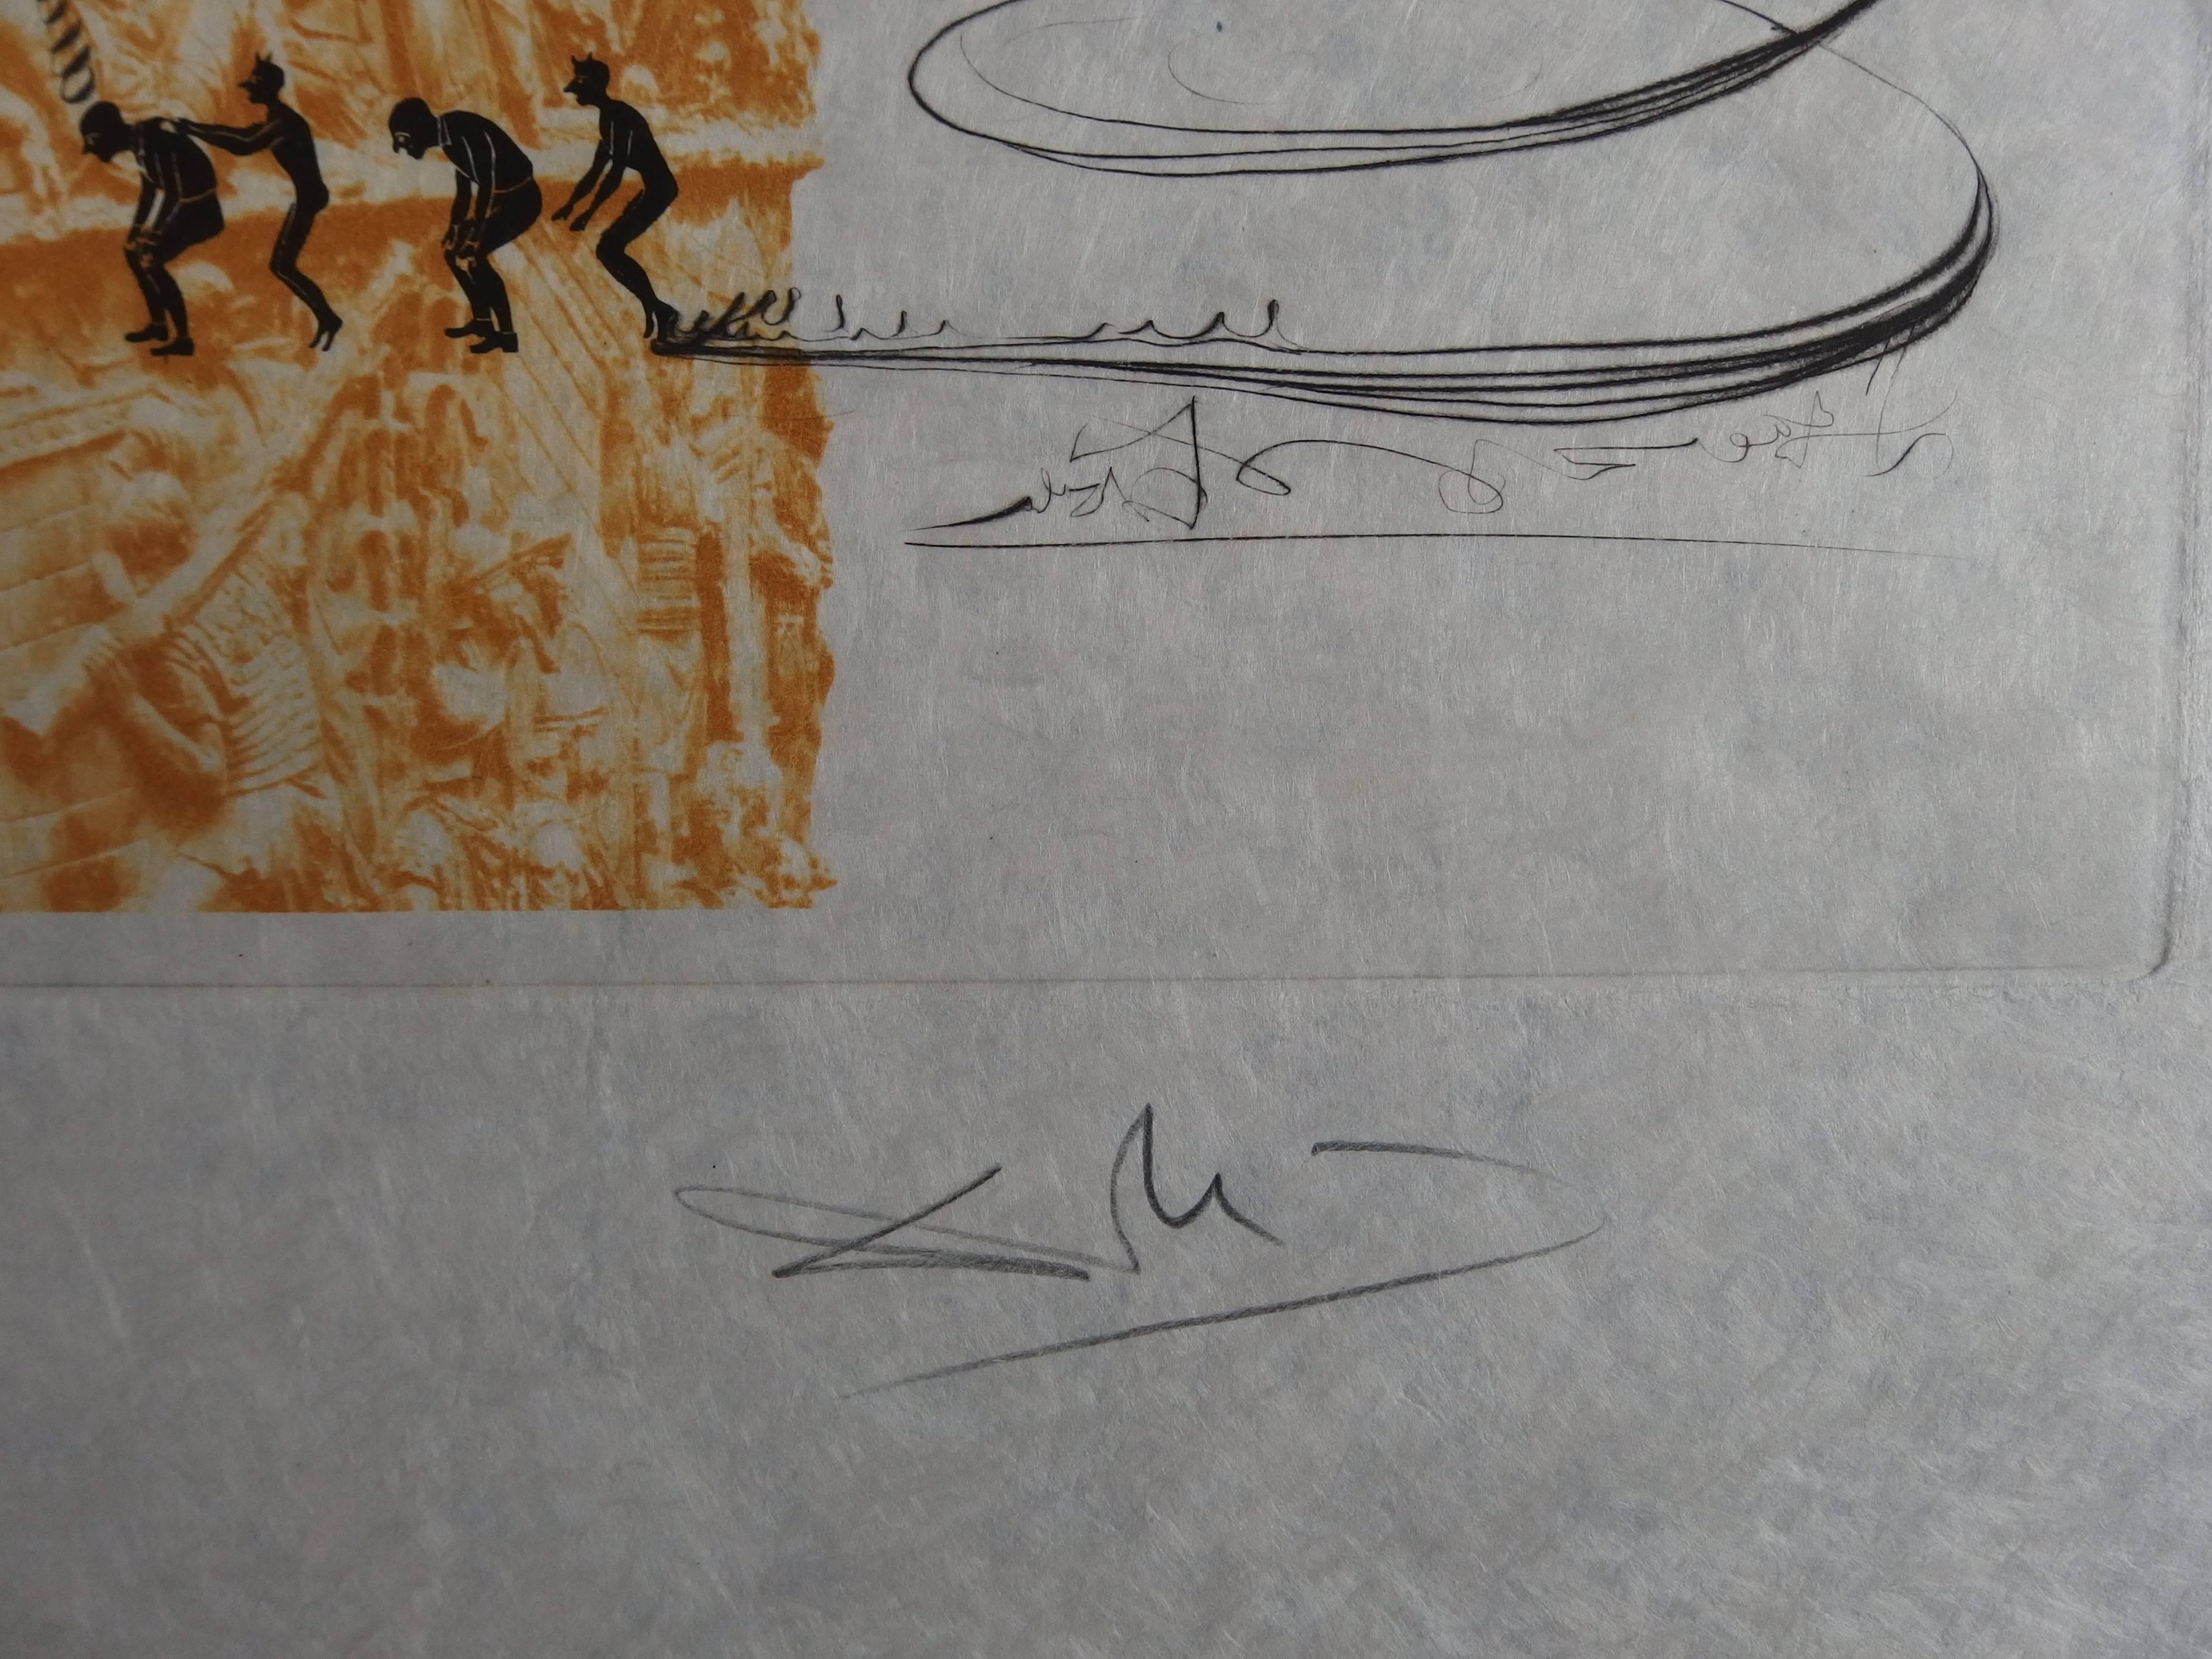 Ten Recipes of Immortality : The System Caga y Menja - Signed etching - Print by Salvador Dalí